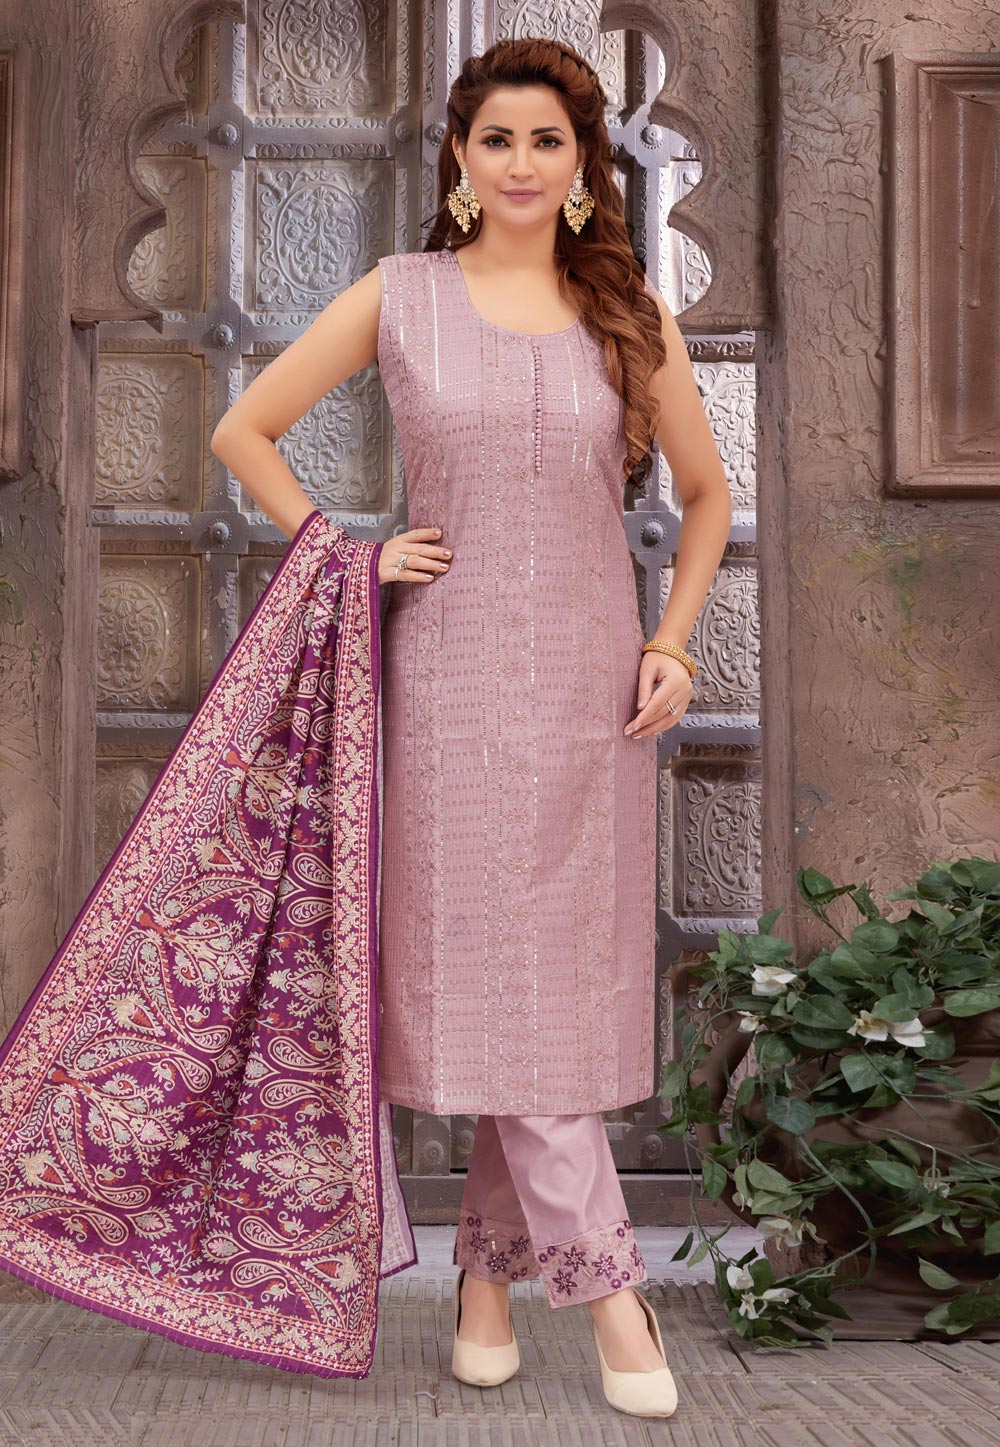 RESHAM VOL-4 BY OSSM 401 TO 406 SERIES CHANDERI EMBROIDERY STITCHED DRESSES